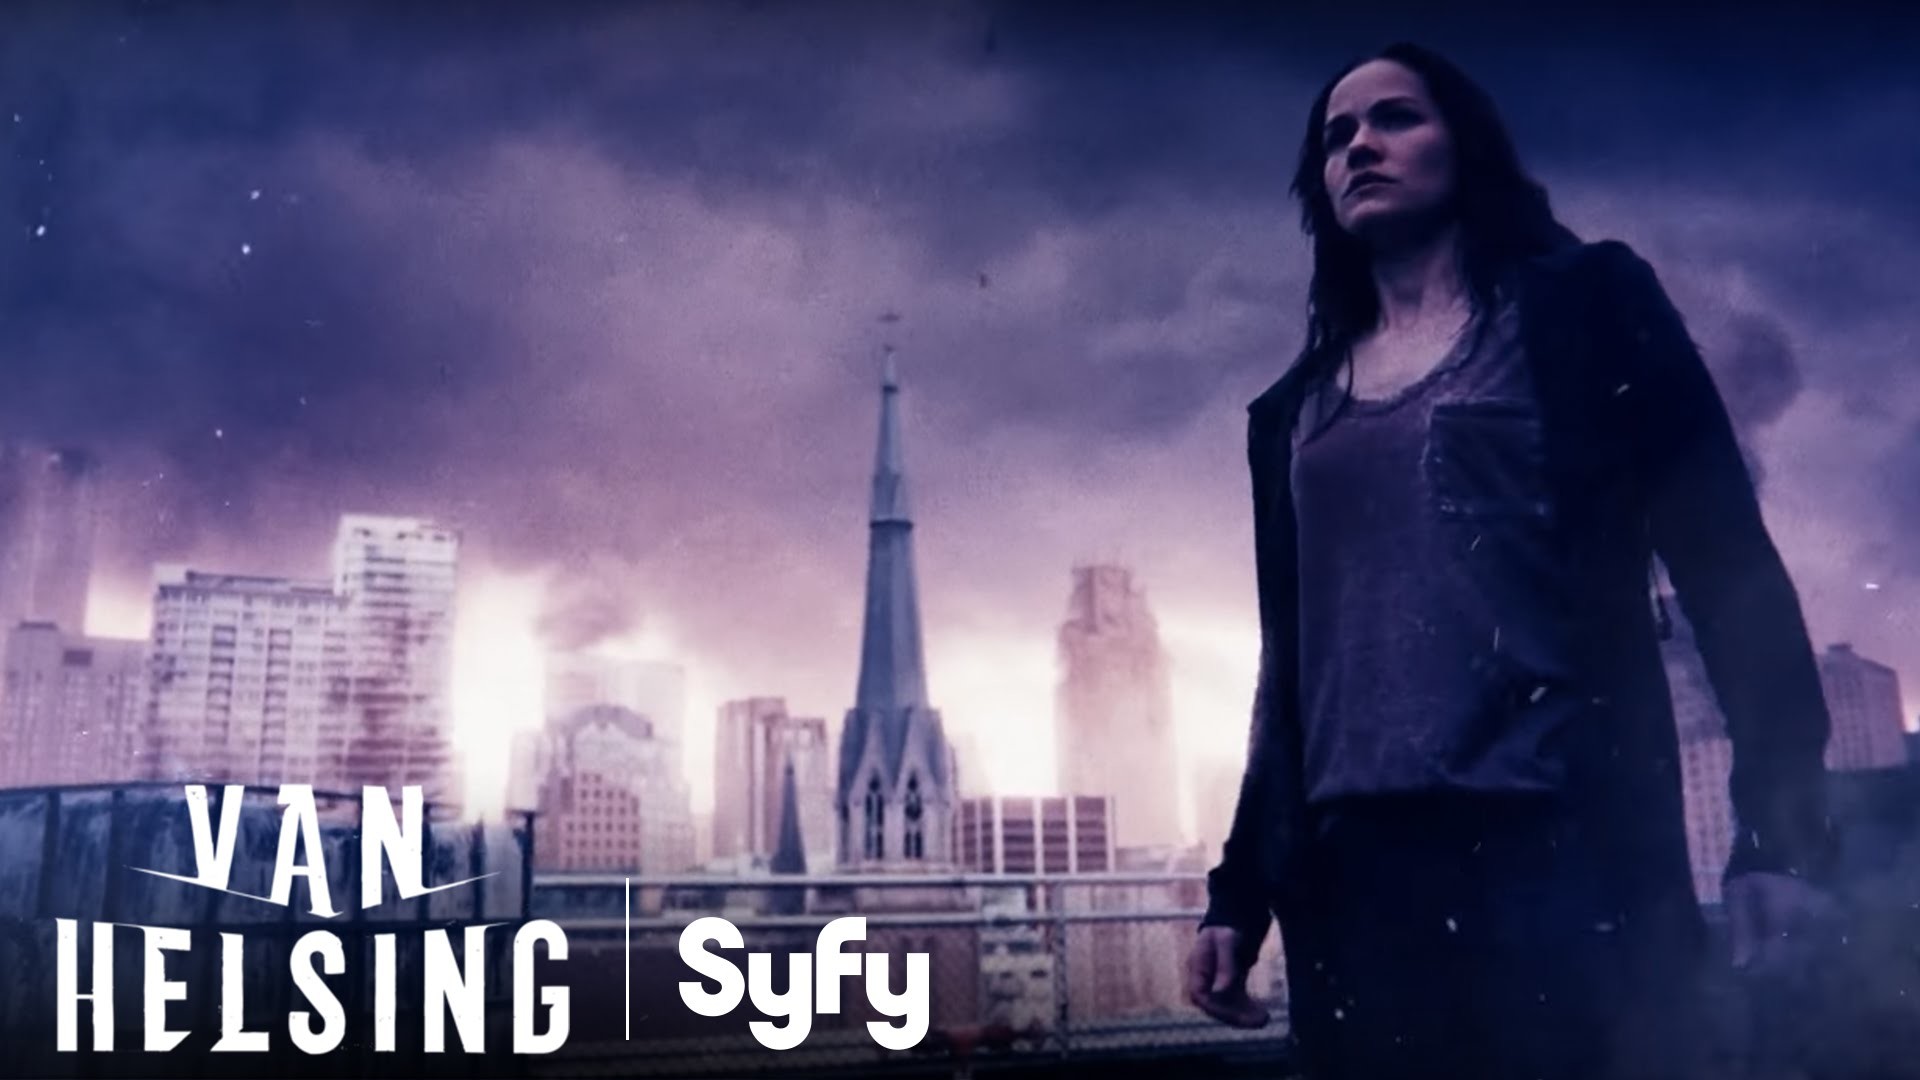 1920x1080 Van Helsing (Syfy) images V a n H e l s i n g HD wallpaper and background  photos